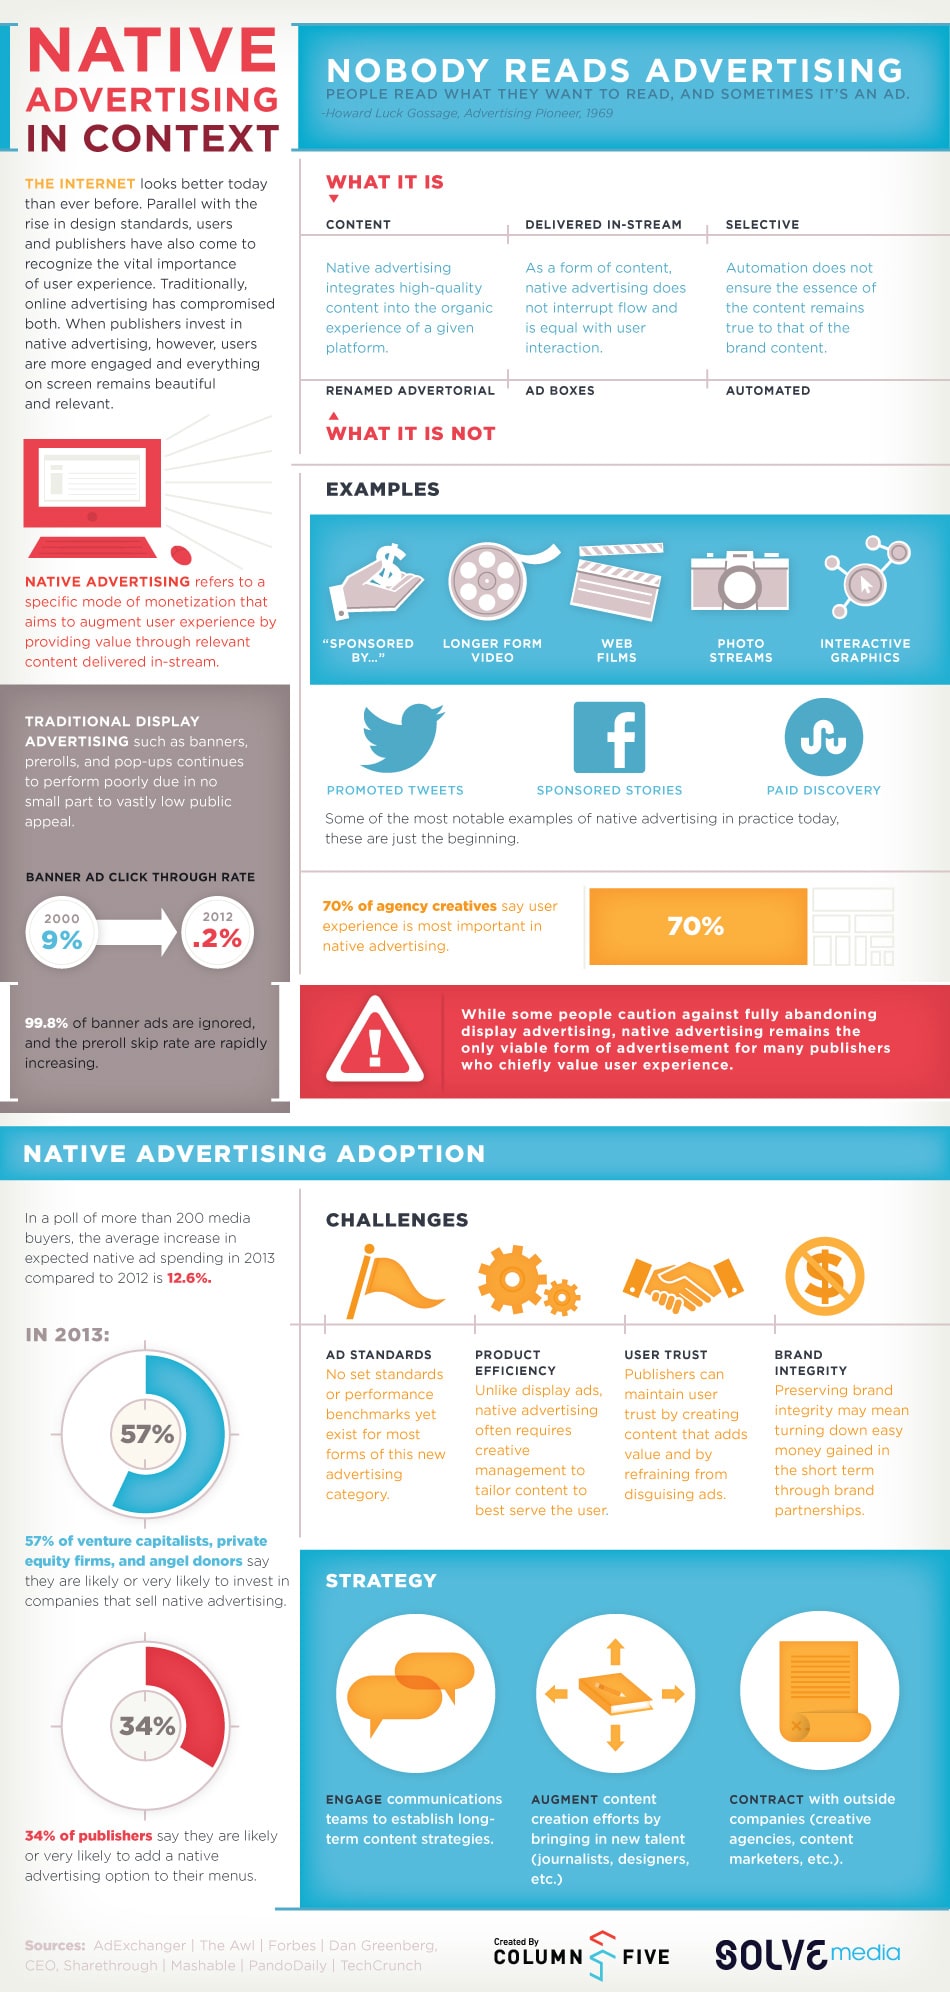 The Small Business Guide To Native Advertising [Infographic]